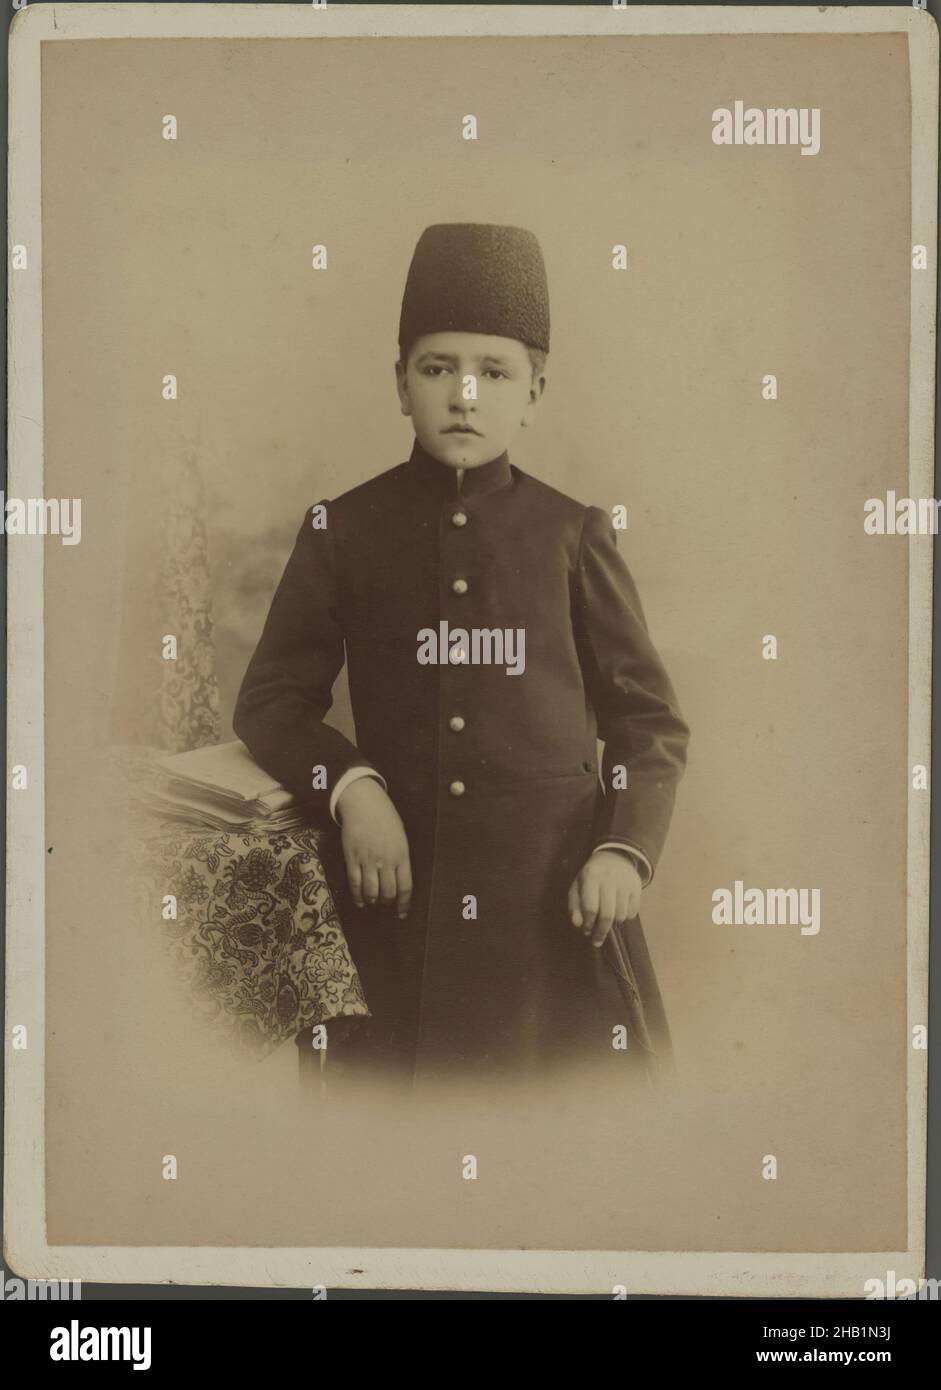 One of 274 Vintage Photographs, Photograph, late 19th-early 20th century, Qajar, Qajar Period, 5 13/16 x 4 5/16 in., 14.8 x 11 cm, boy, child, photograph, photography, portrait, Qajar, studio Stock Photo